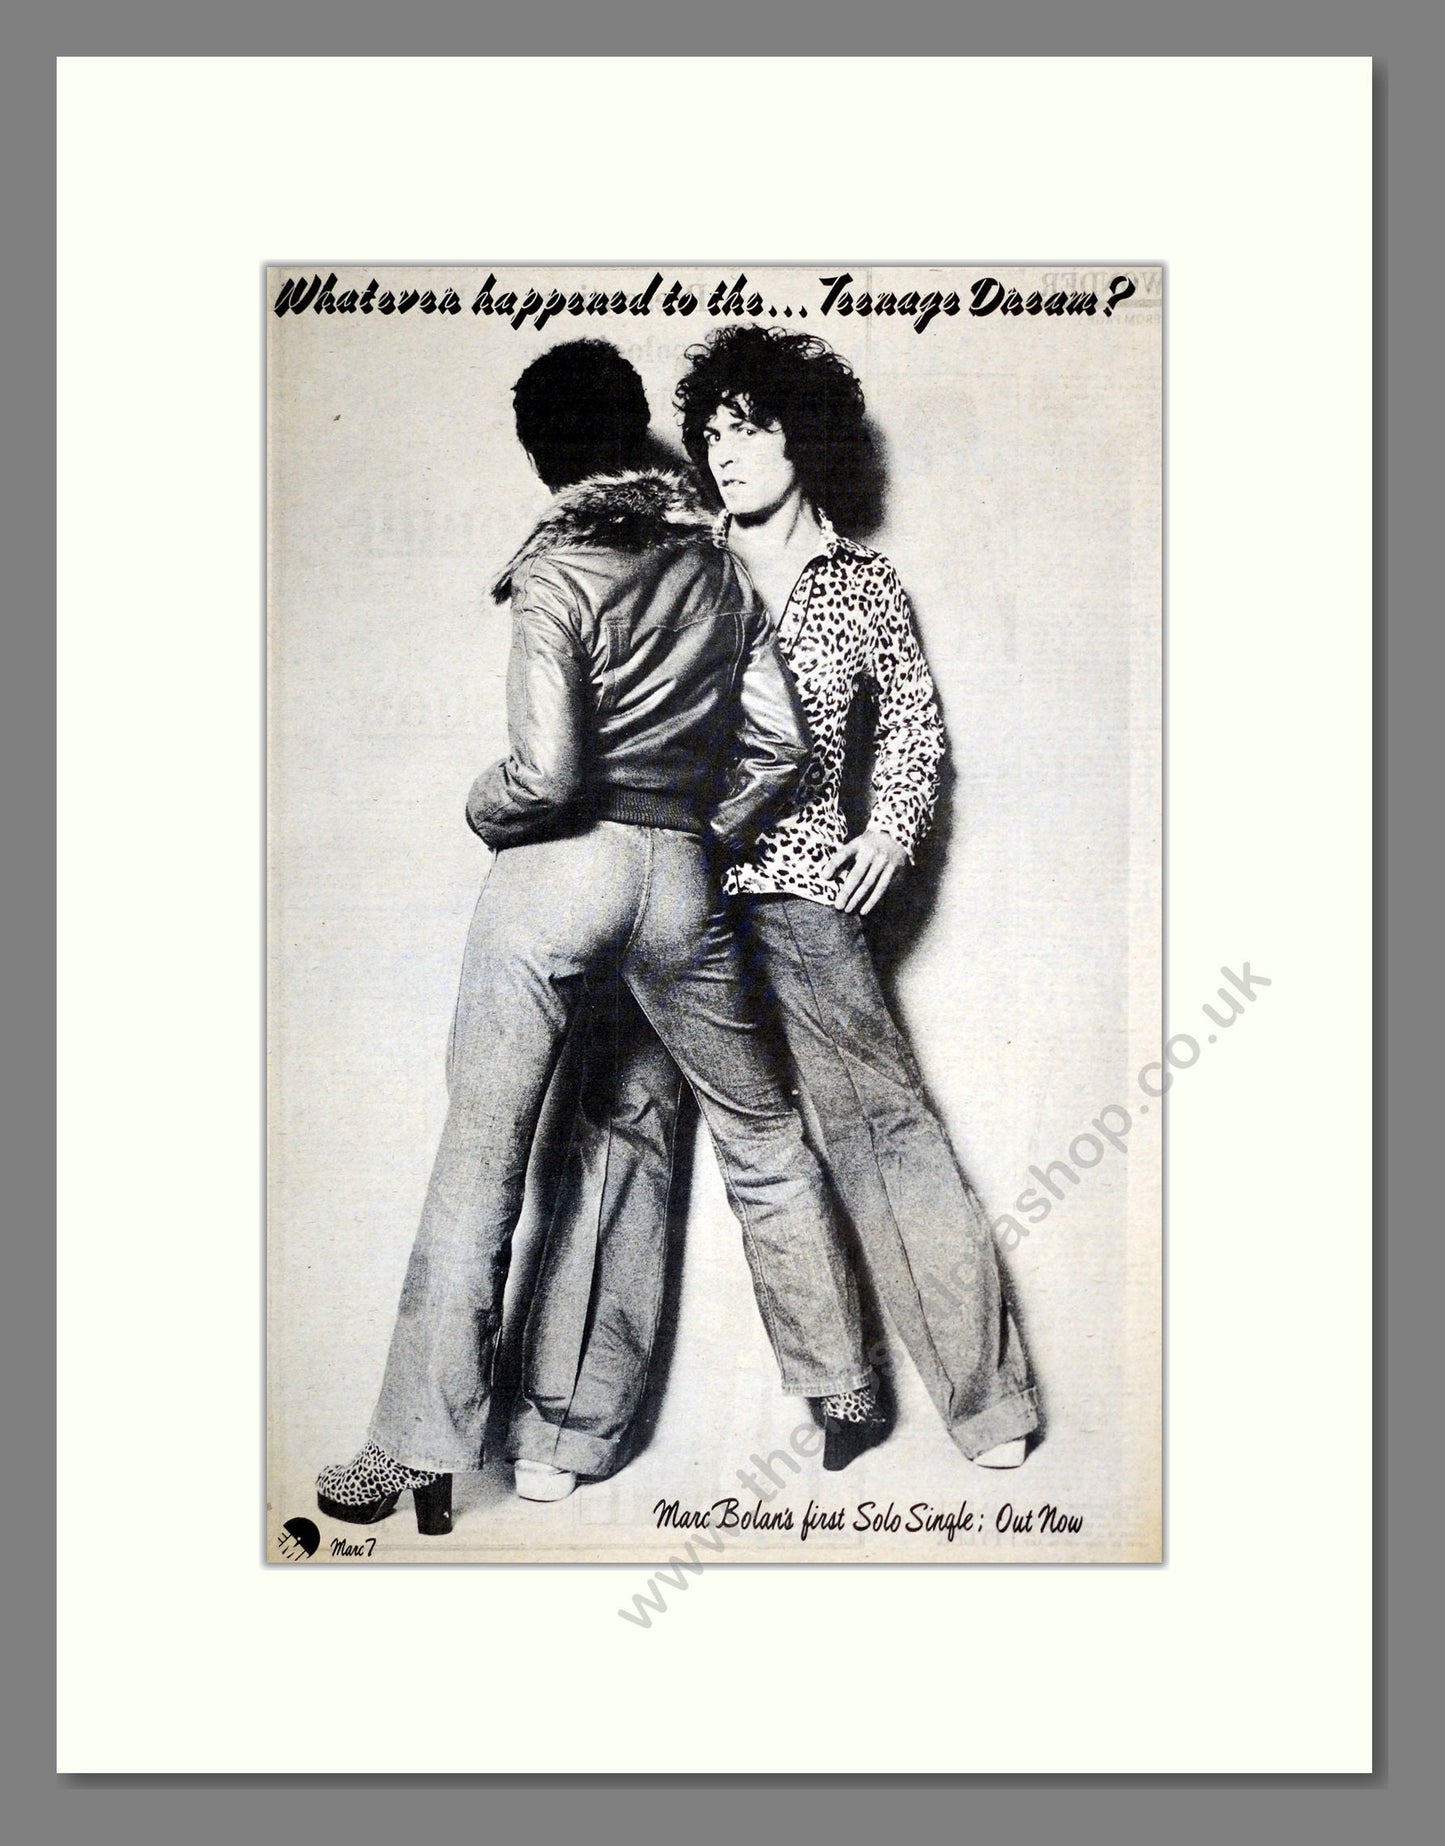 Marc Bolan - Whatever Happened To The Teenage Dream. Vintage Advert 1974 (ref AD17921)